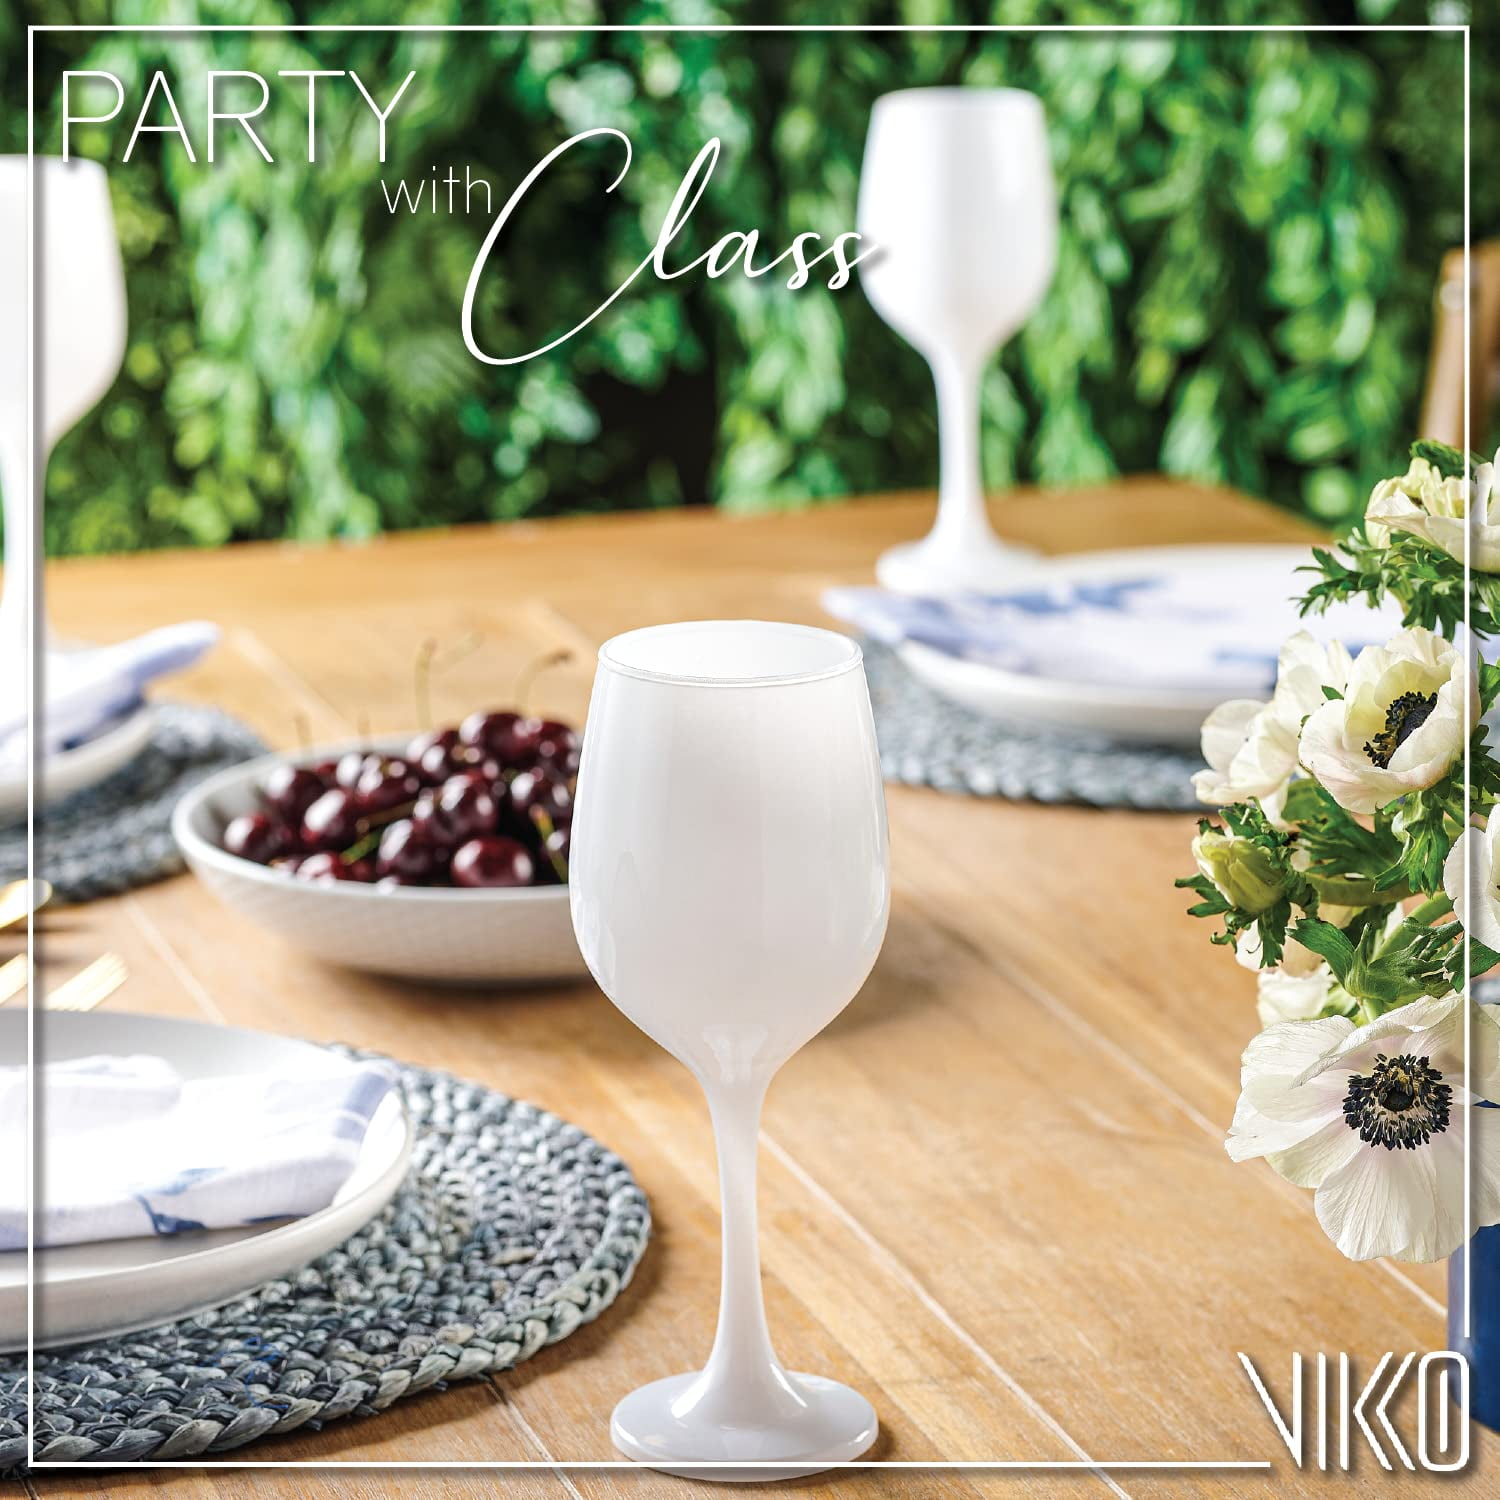 Vikko dcor Wine Glasses, Light Gold Wine Glass, 14 oz Fancy Wine Glasses with Stem for Red and White Wine, Thick and Durable Wine Glass, Dishwasher